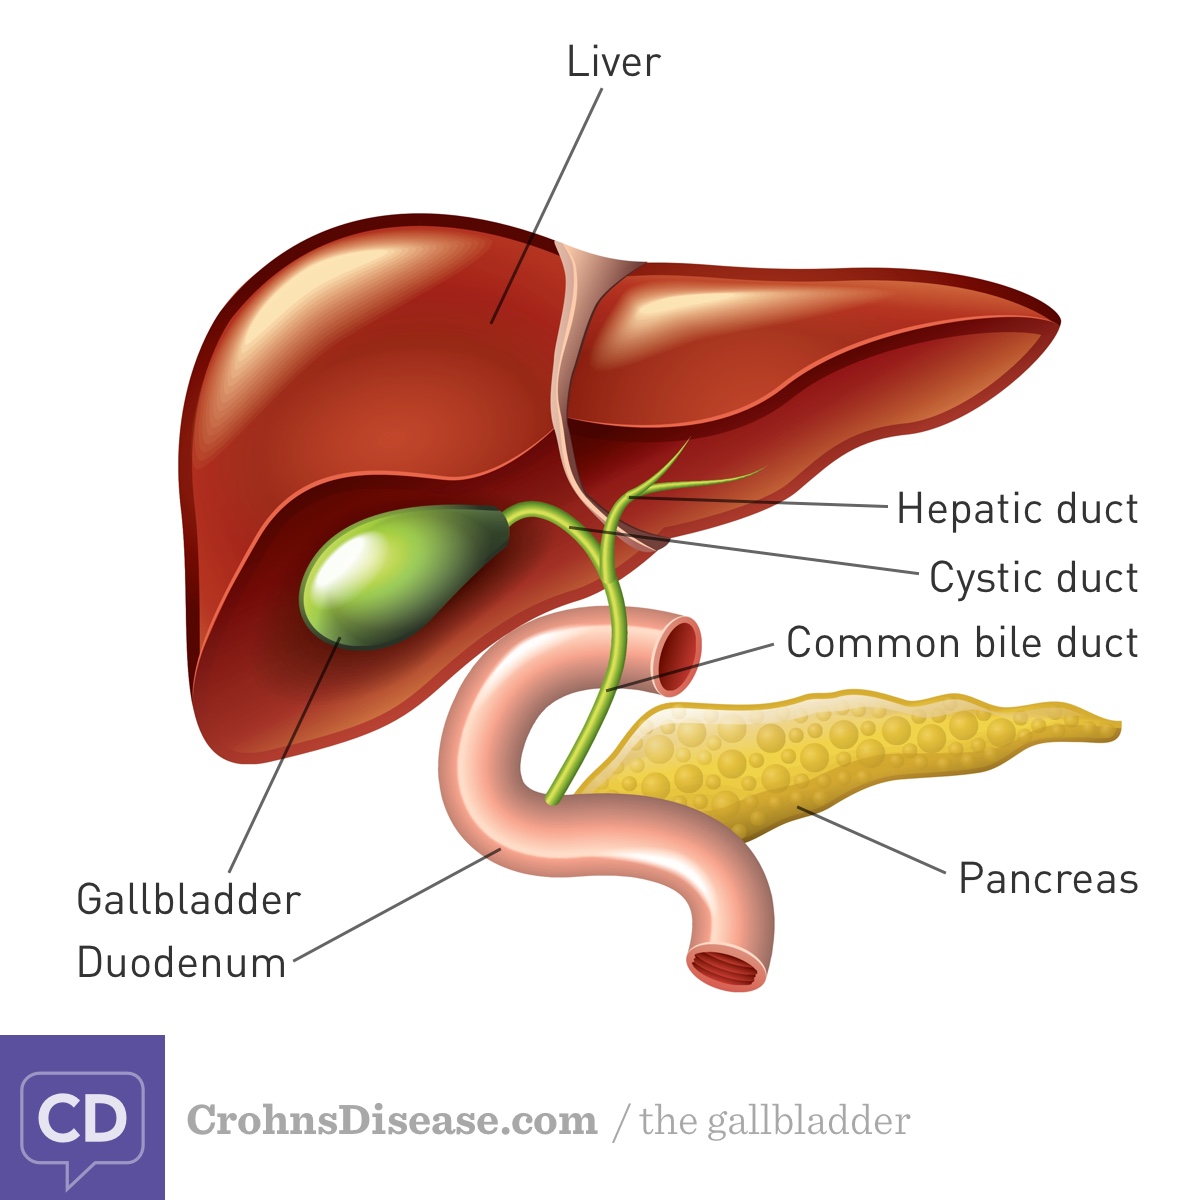 illustrated gallbladder and bile ducts located below the liver, connecting to the duodenum.